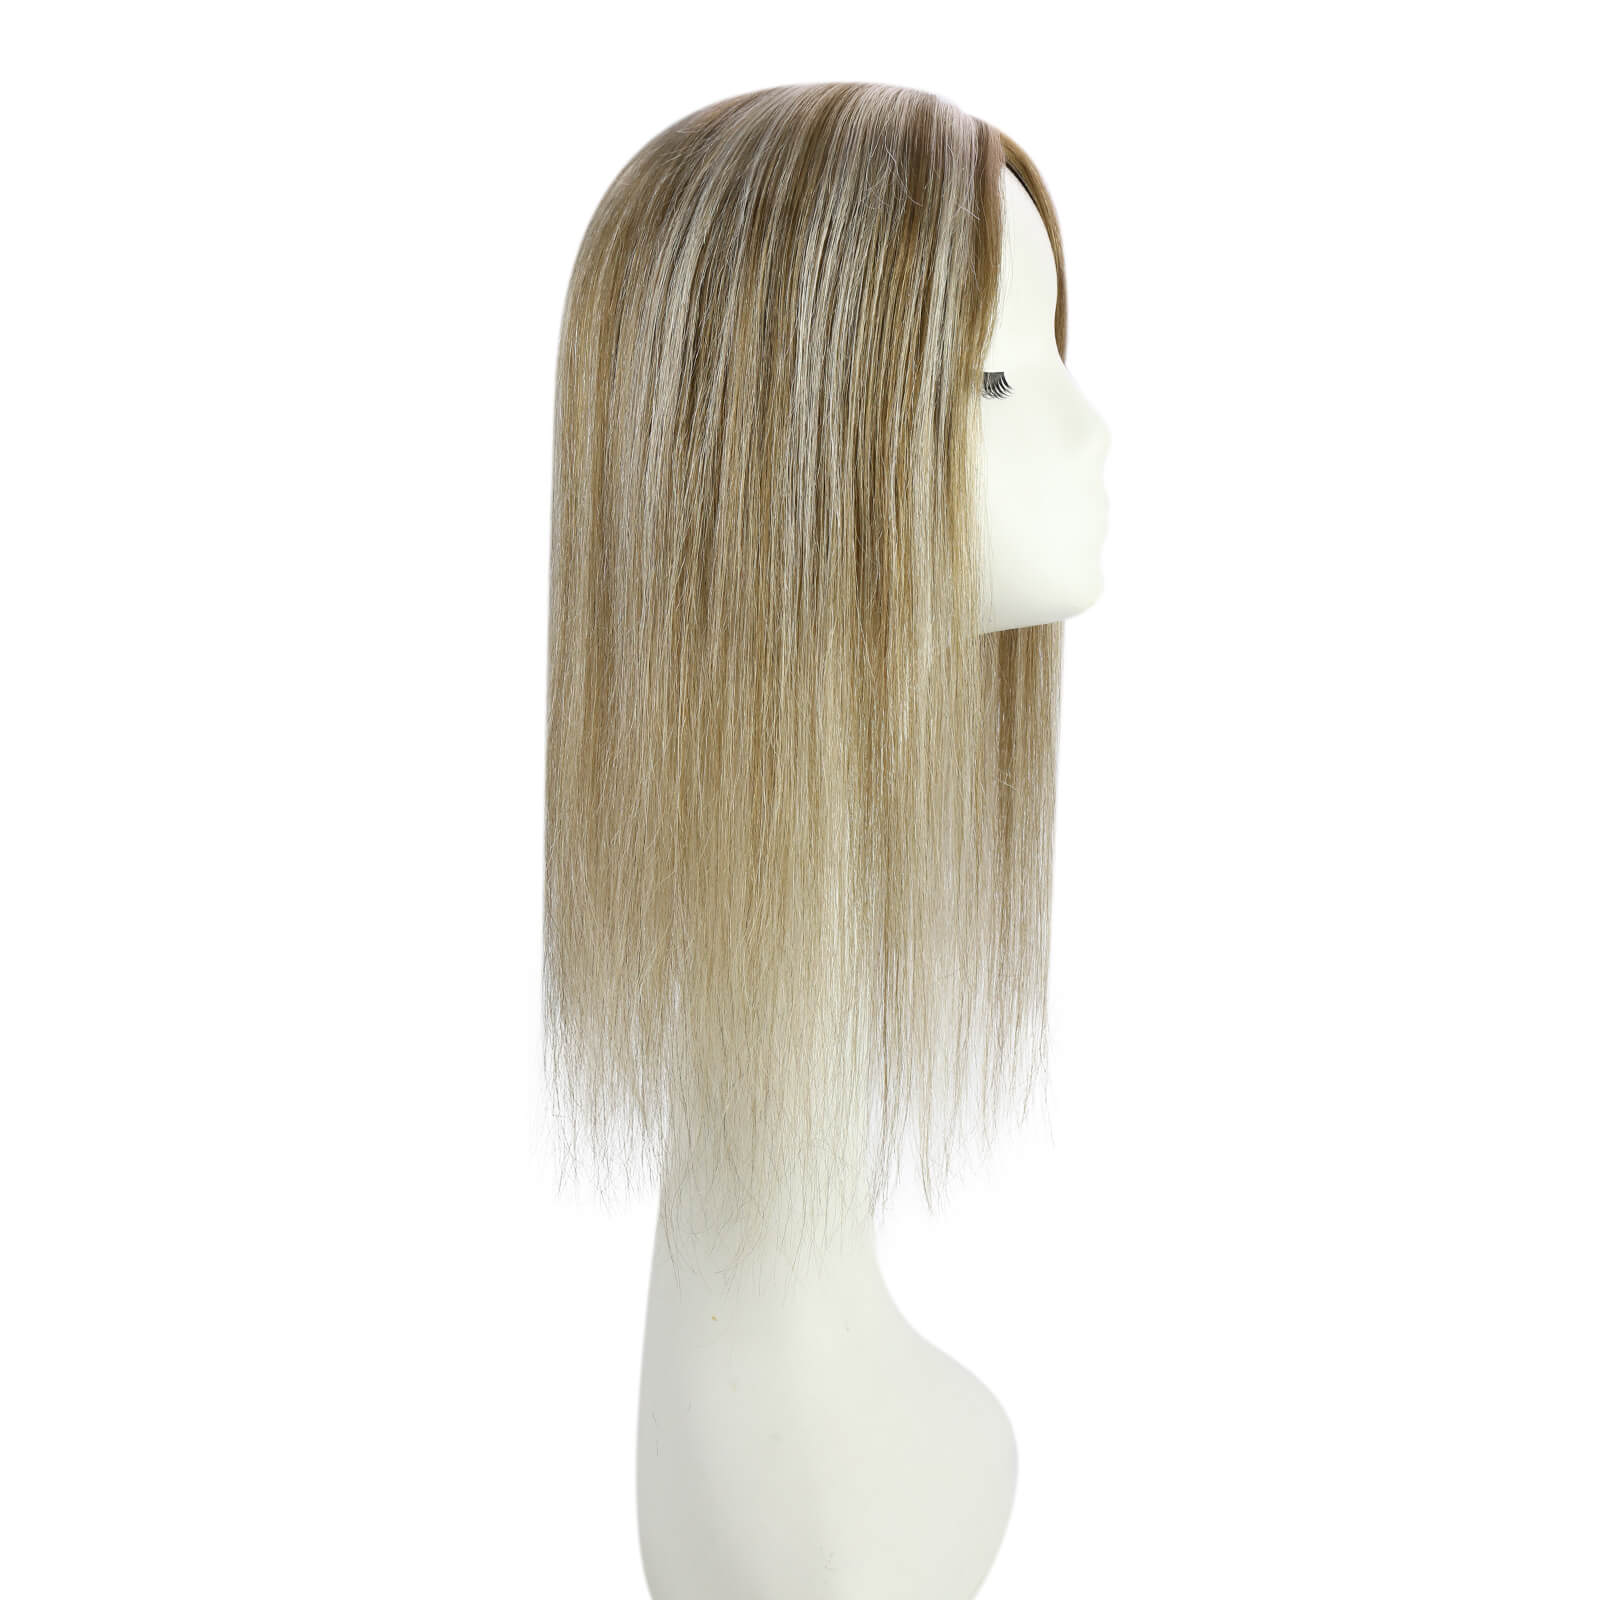 remy hairpieces for women highlighted blonde hai rtoupee for hair loss